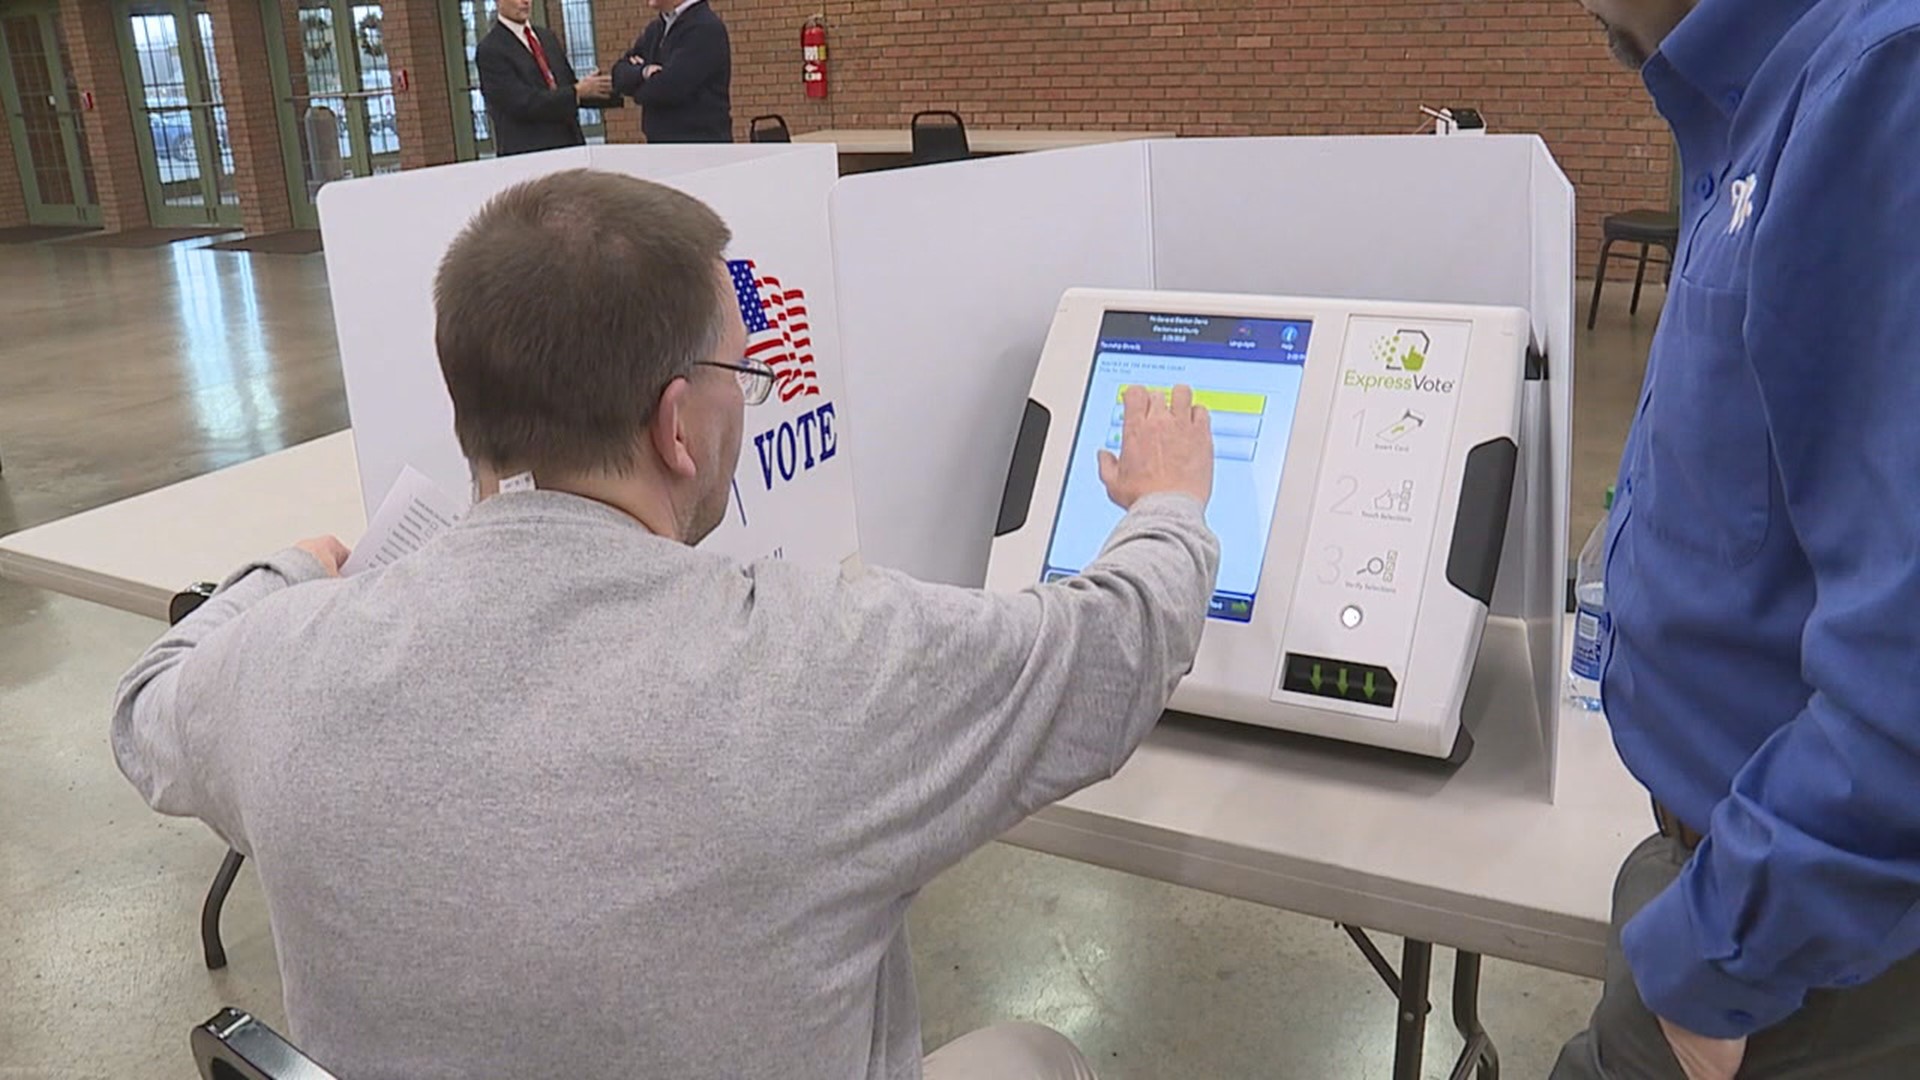 The new training program is providing election administration training for election officials across the Commonwealth.